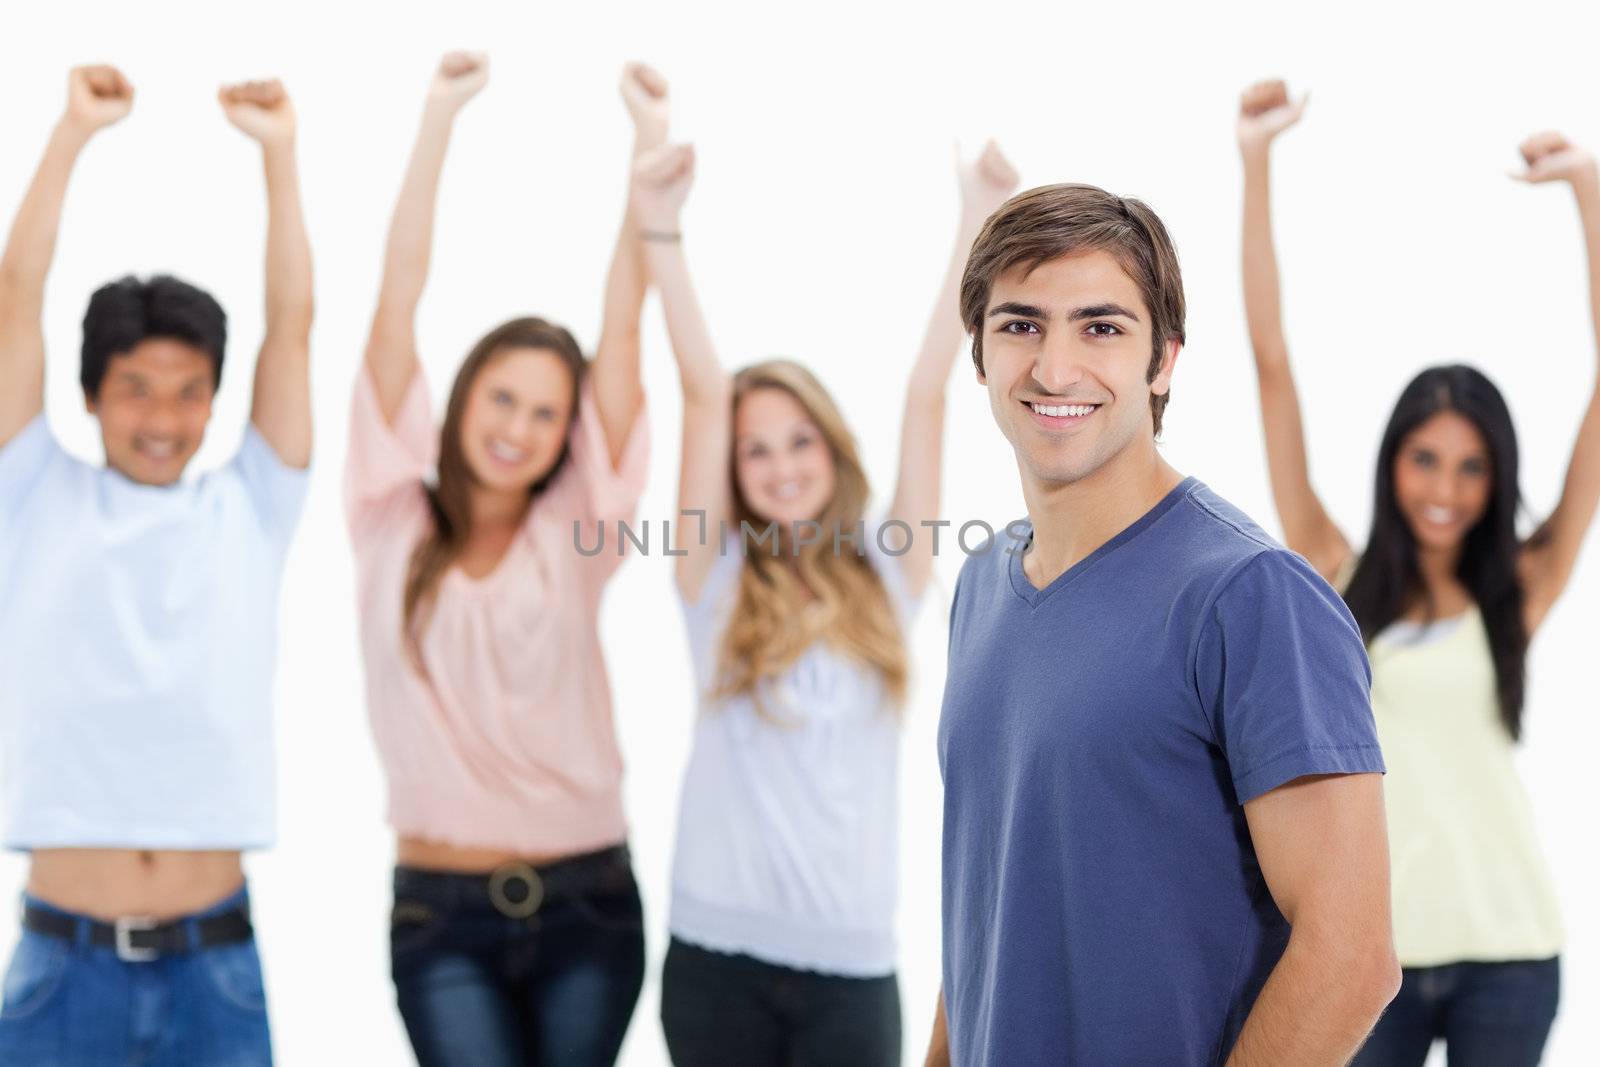 Smiling man with people behind him raising their arms against white background